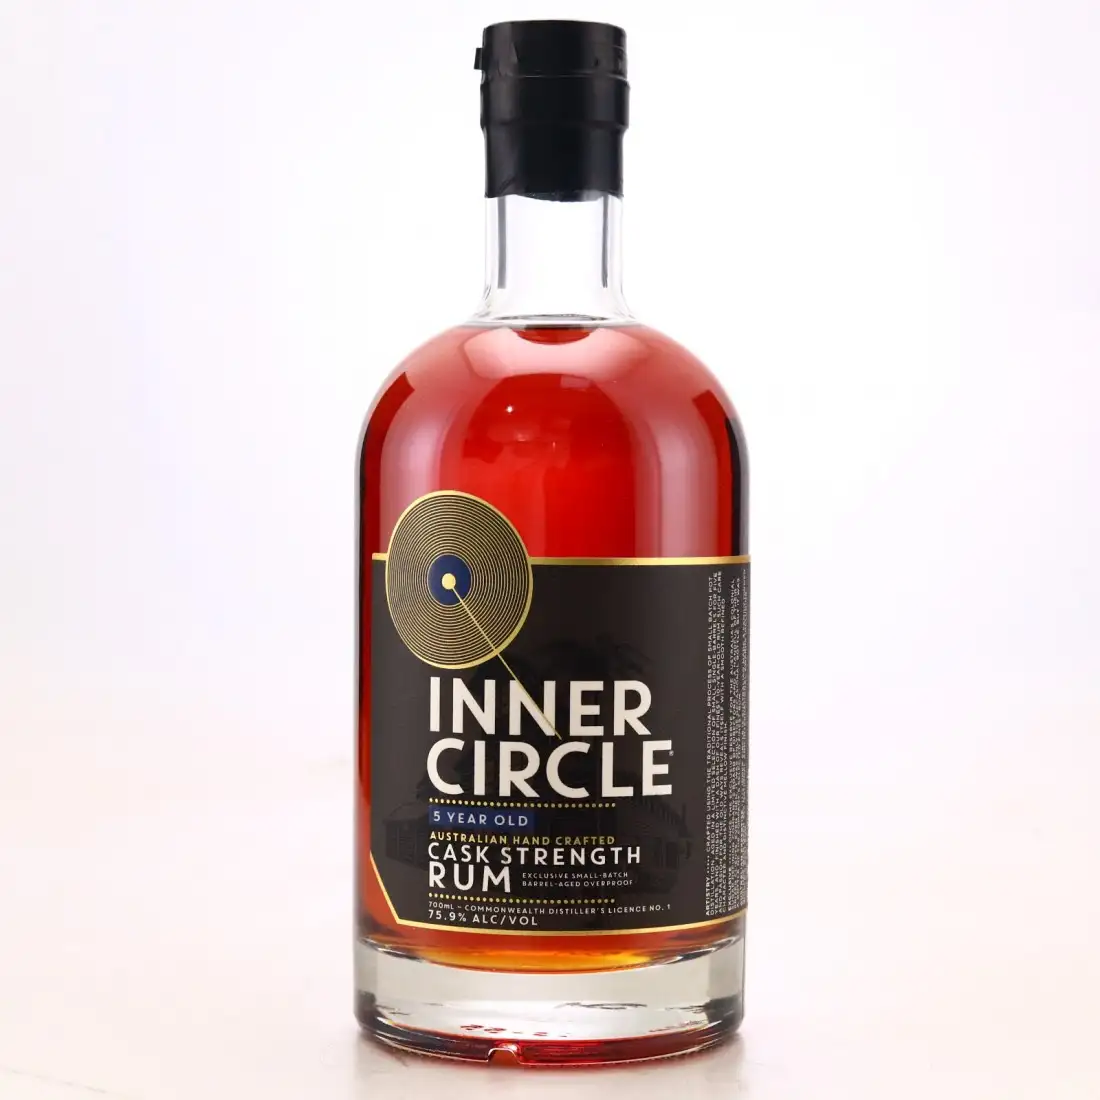 Image of the front of the bottle of the rum Inner Circle Cask Strength Rum